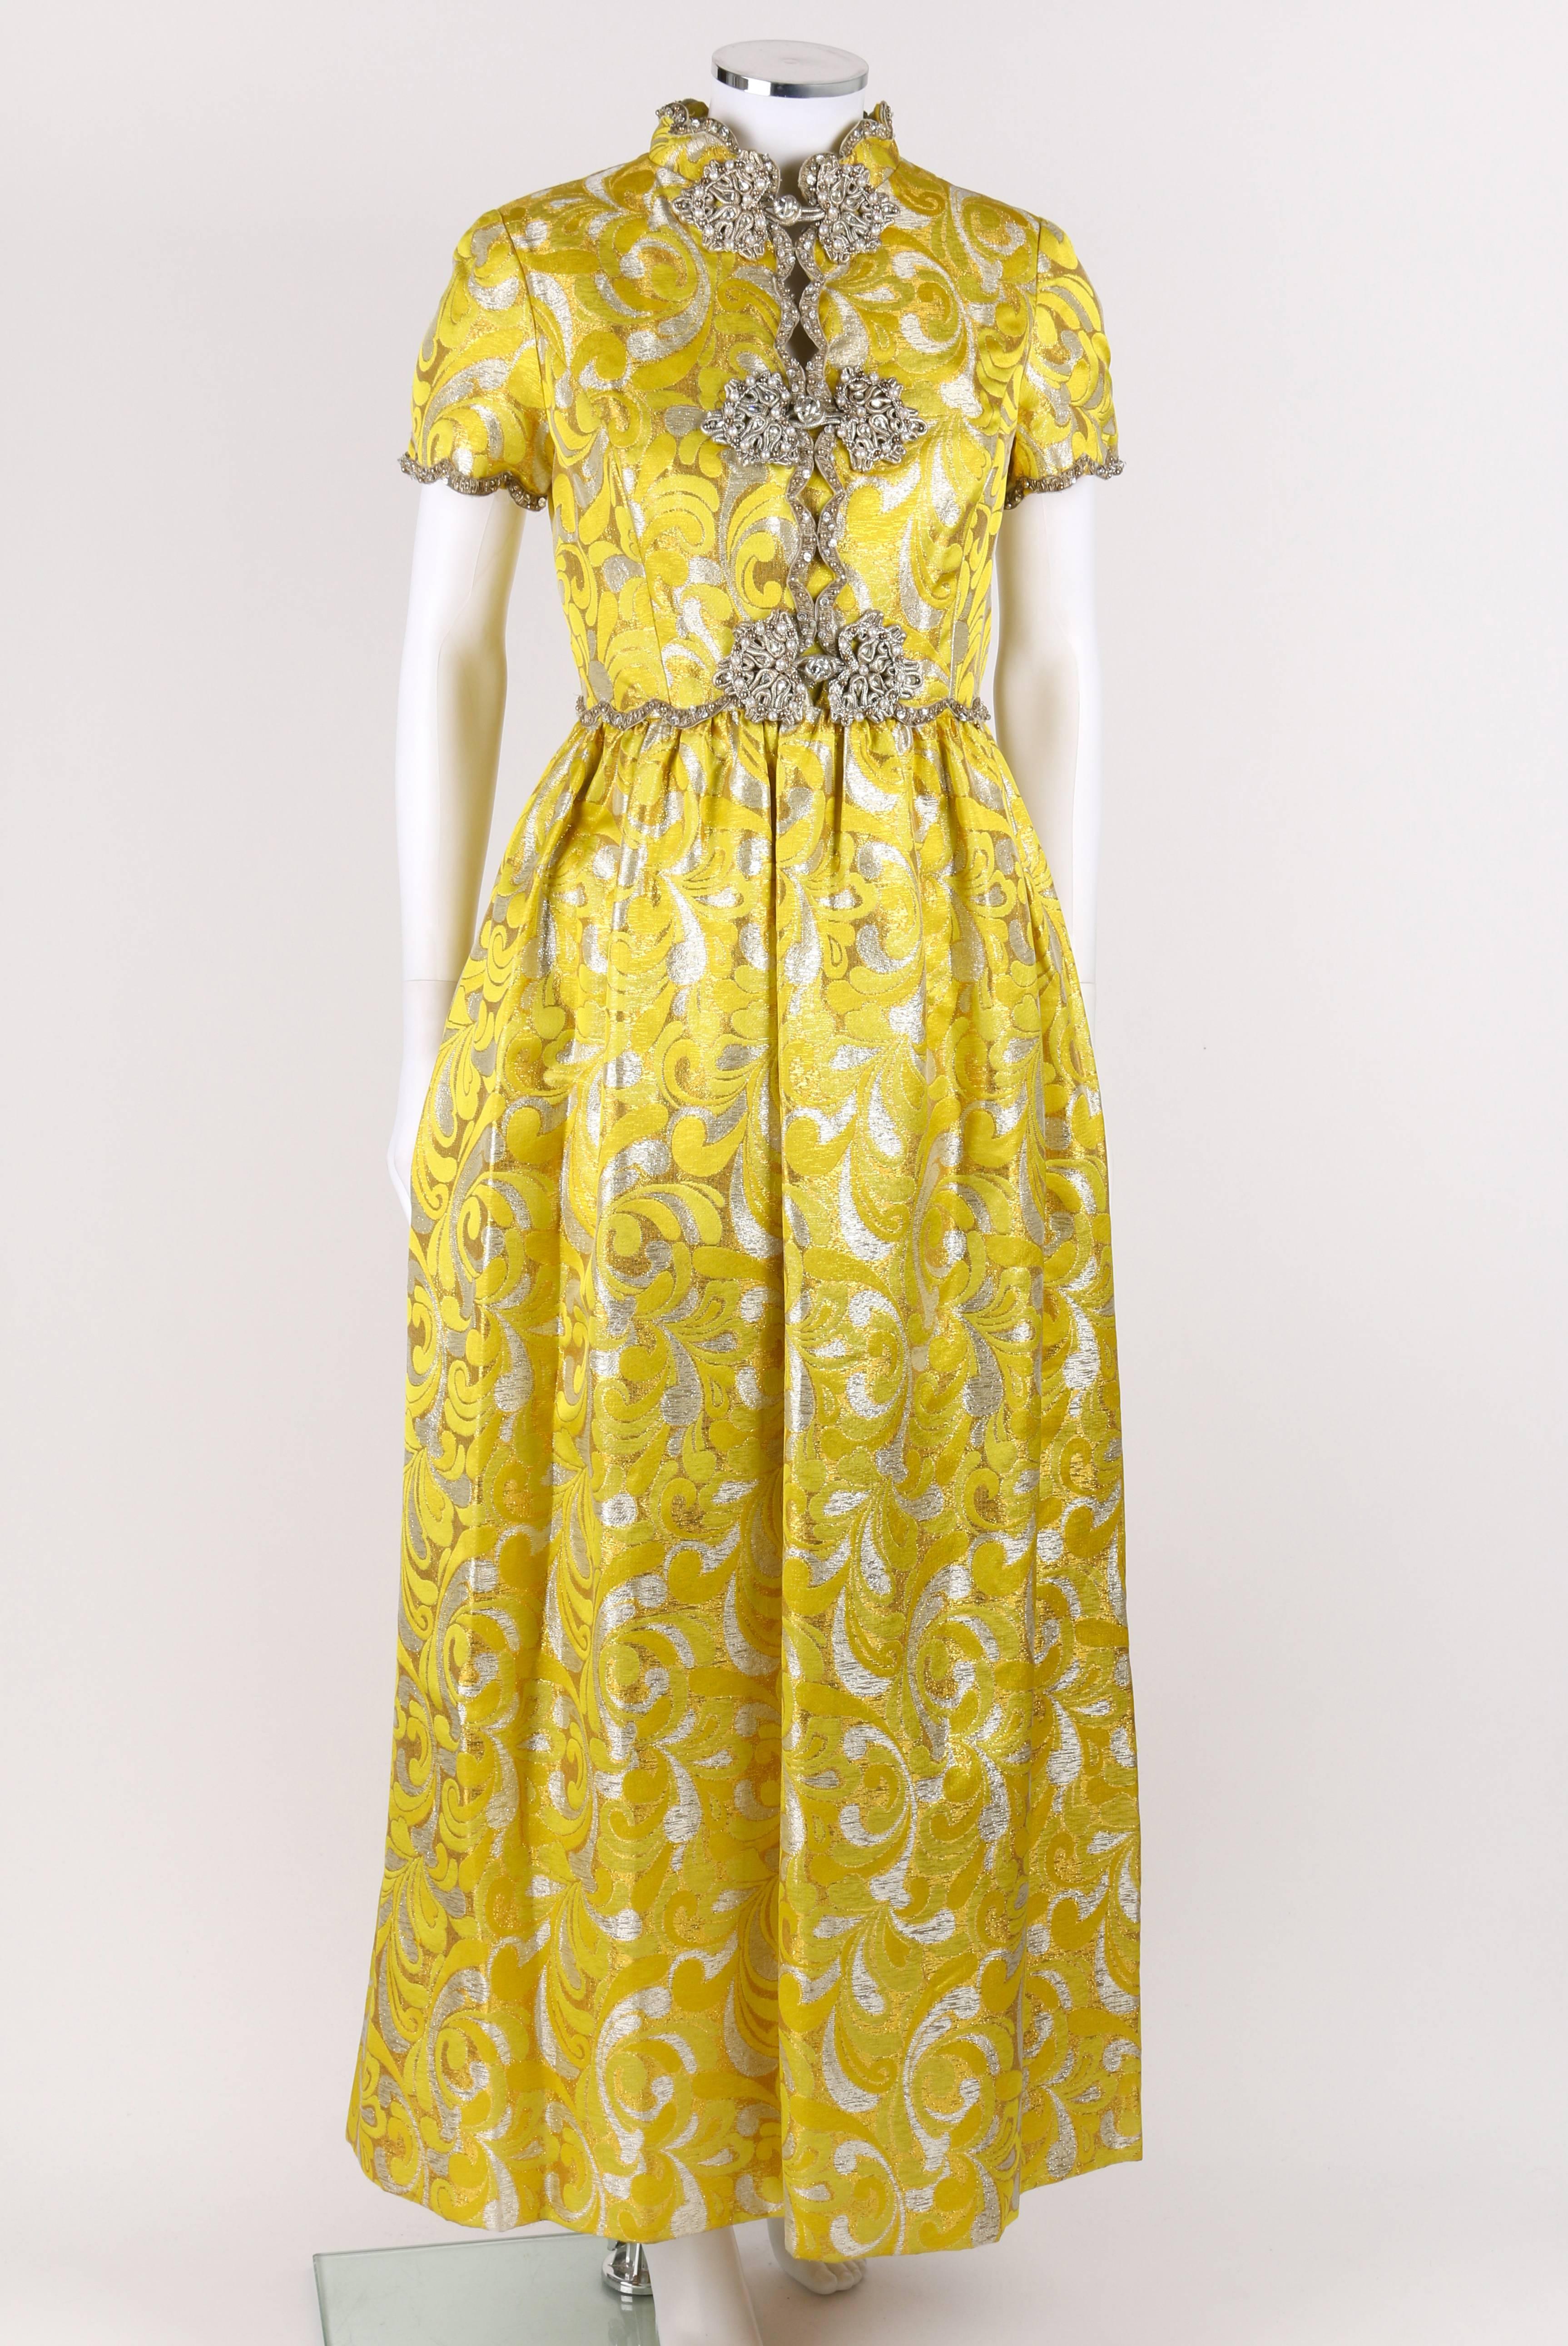 Vintage Oscar de la Renta c.1968 yellow and silver lurex brocade silk evening gown. Three gold, pearl, and crystal beaded frog closures down center front. Scalloped beaded trim around neckline, waistline, and cuffs. Two hip pockets. Short sleeve.